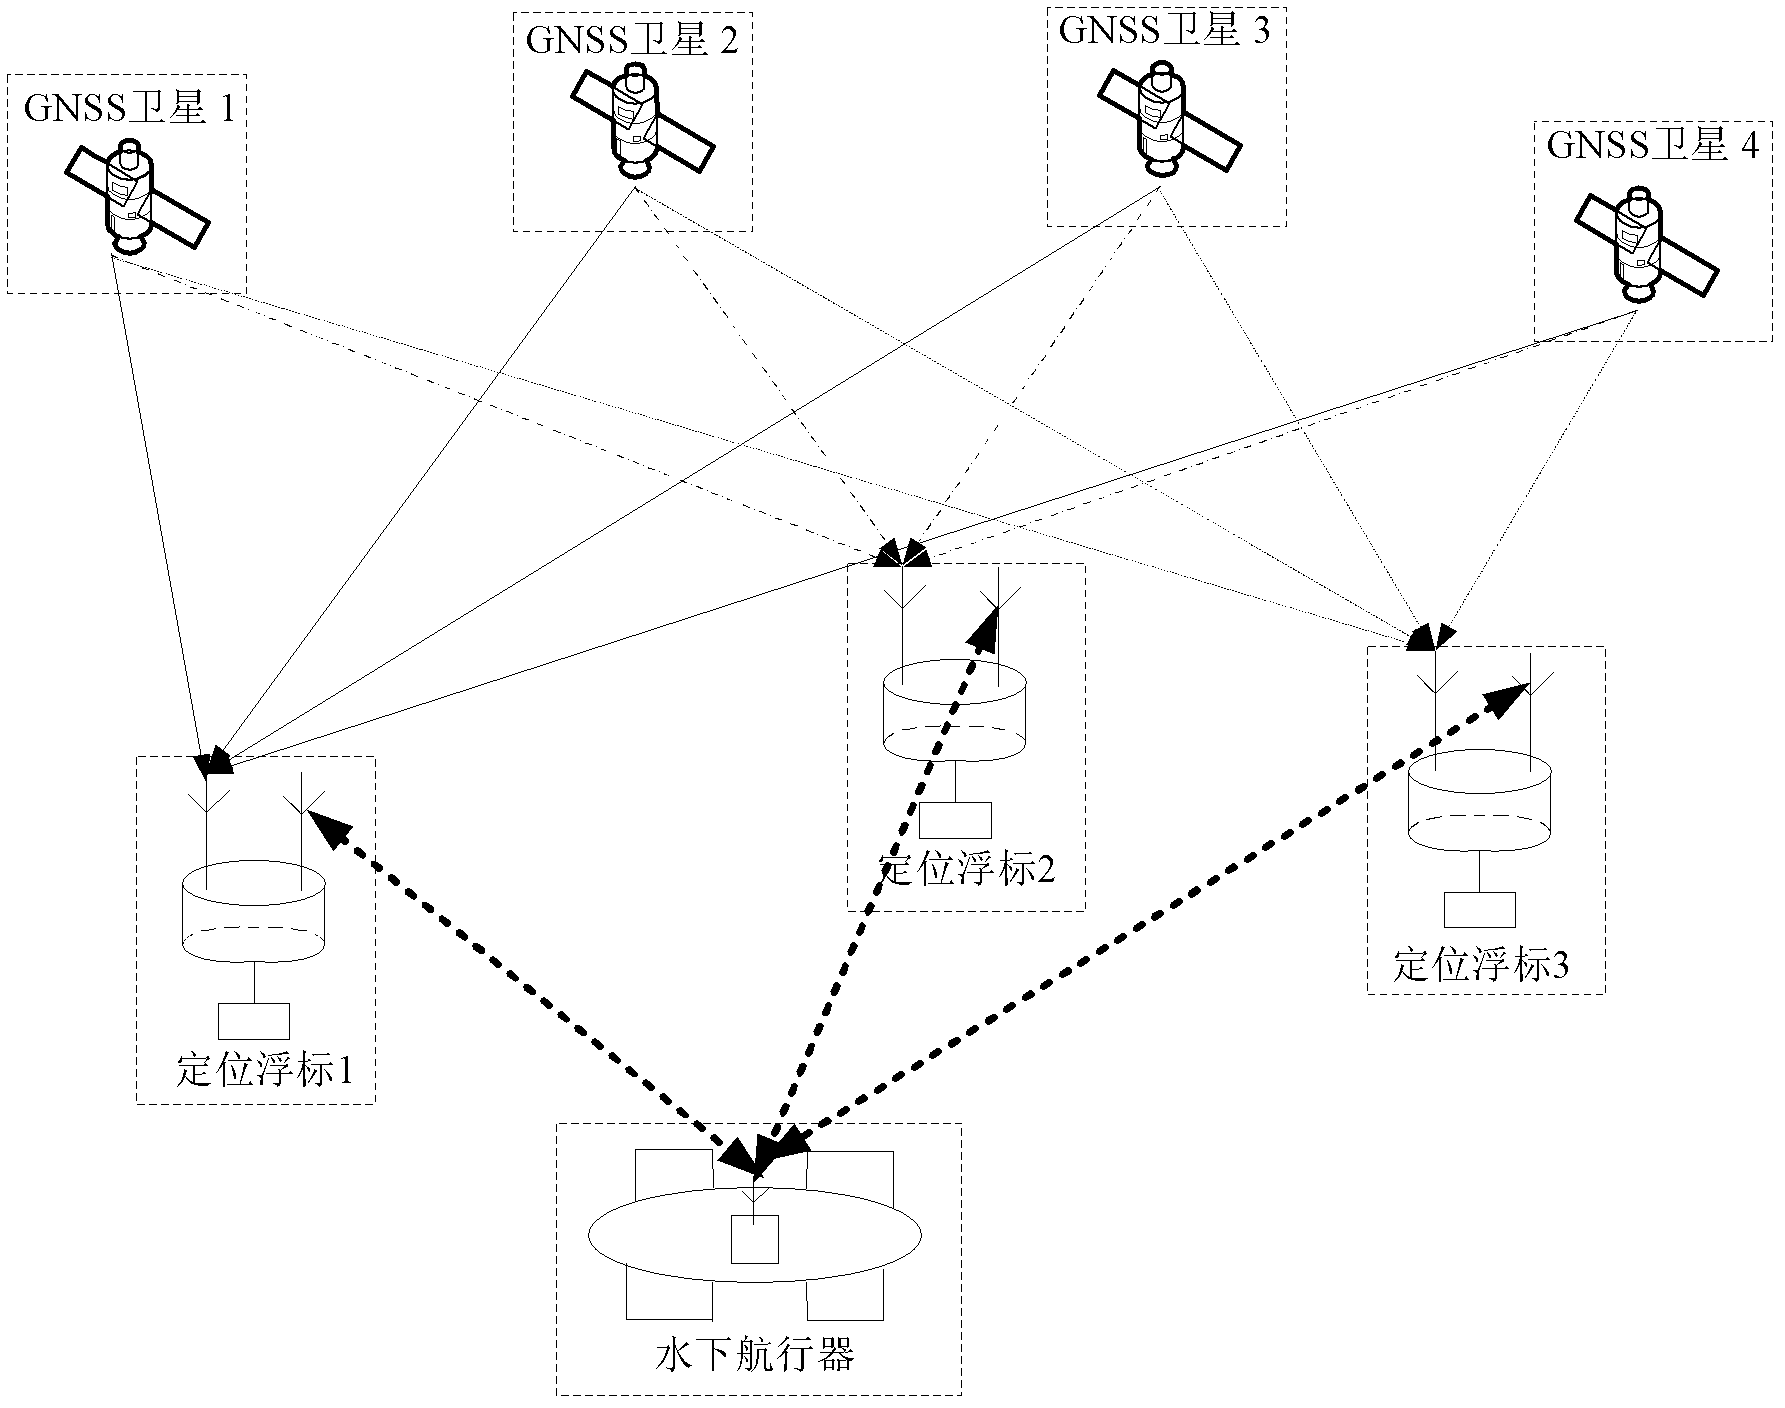 Method and system for locating underwater vehicle on basis of global navigation satellite system (GNSS) satellite